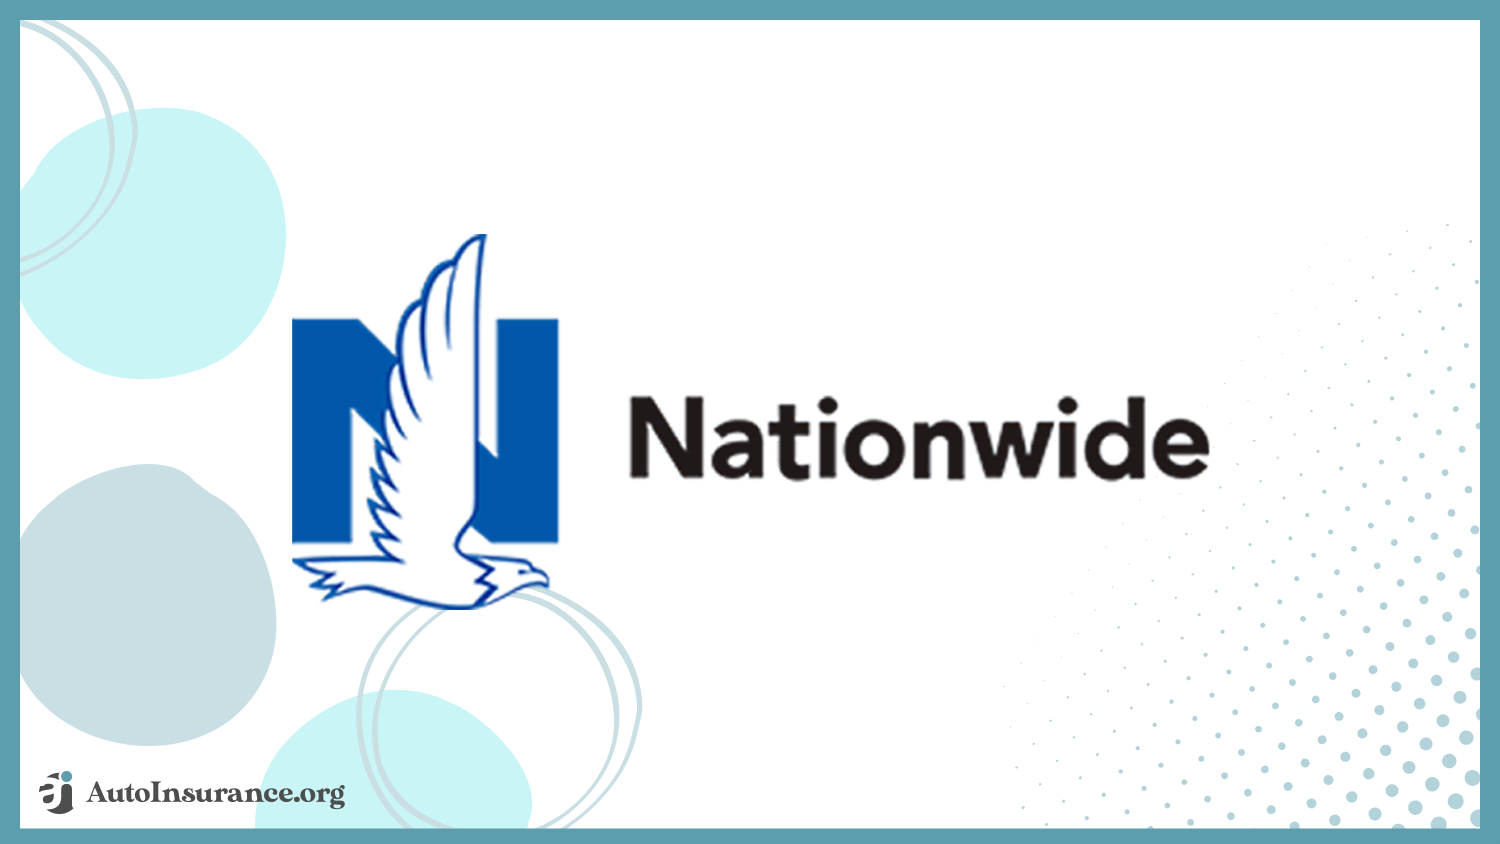 Nationwide: Best Auto Insurance for Limousines